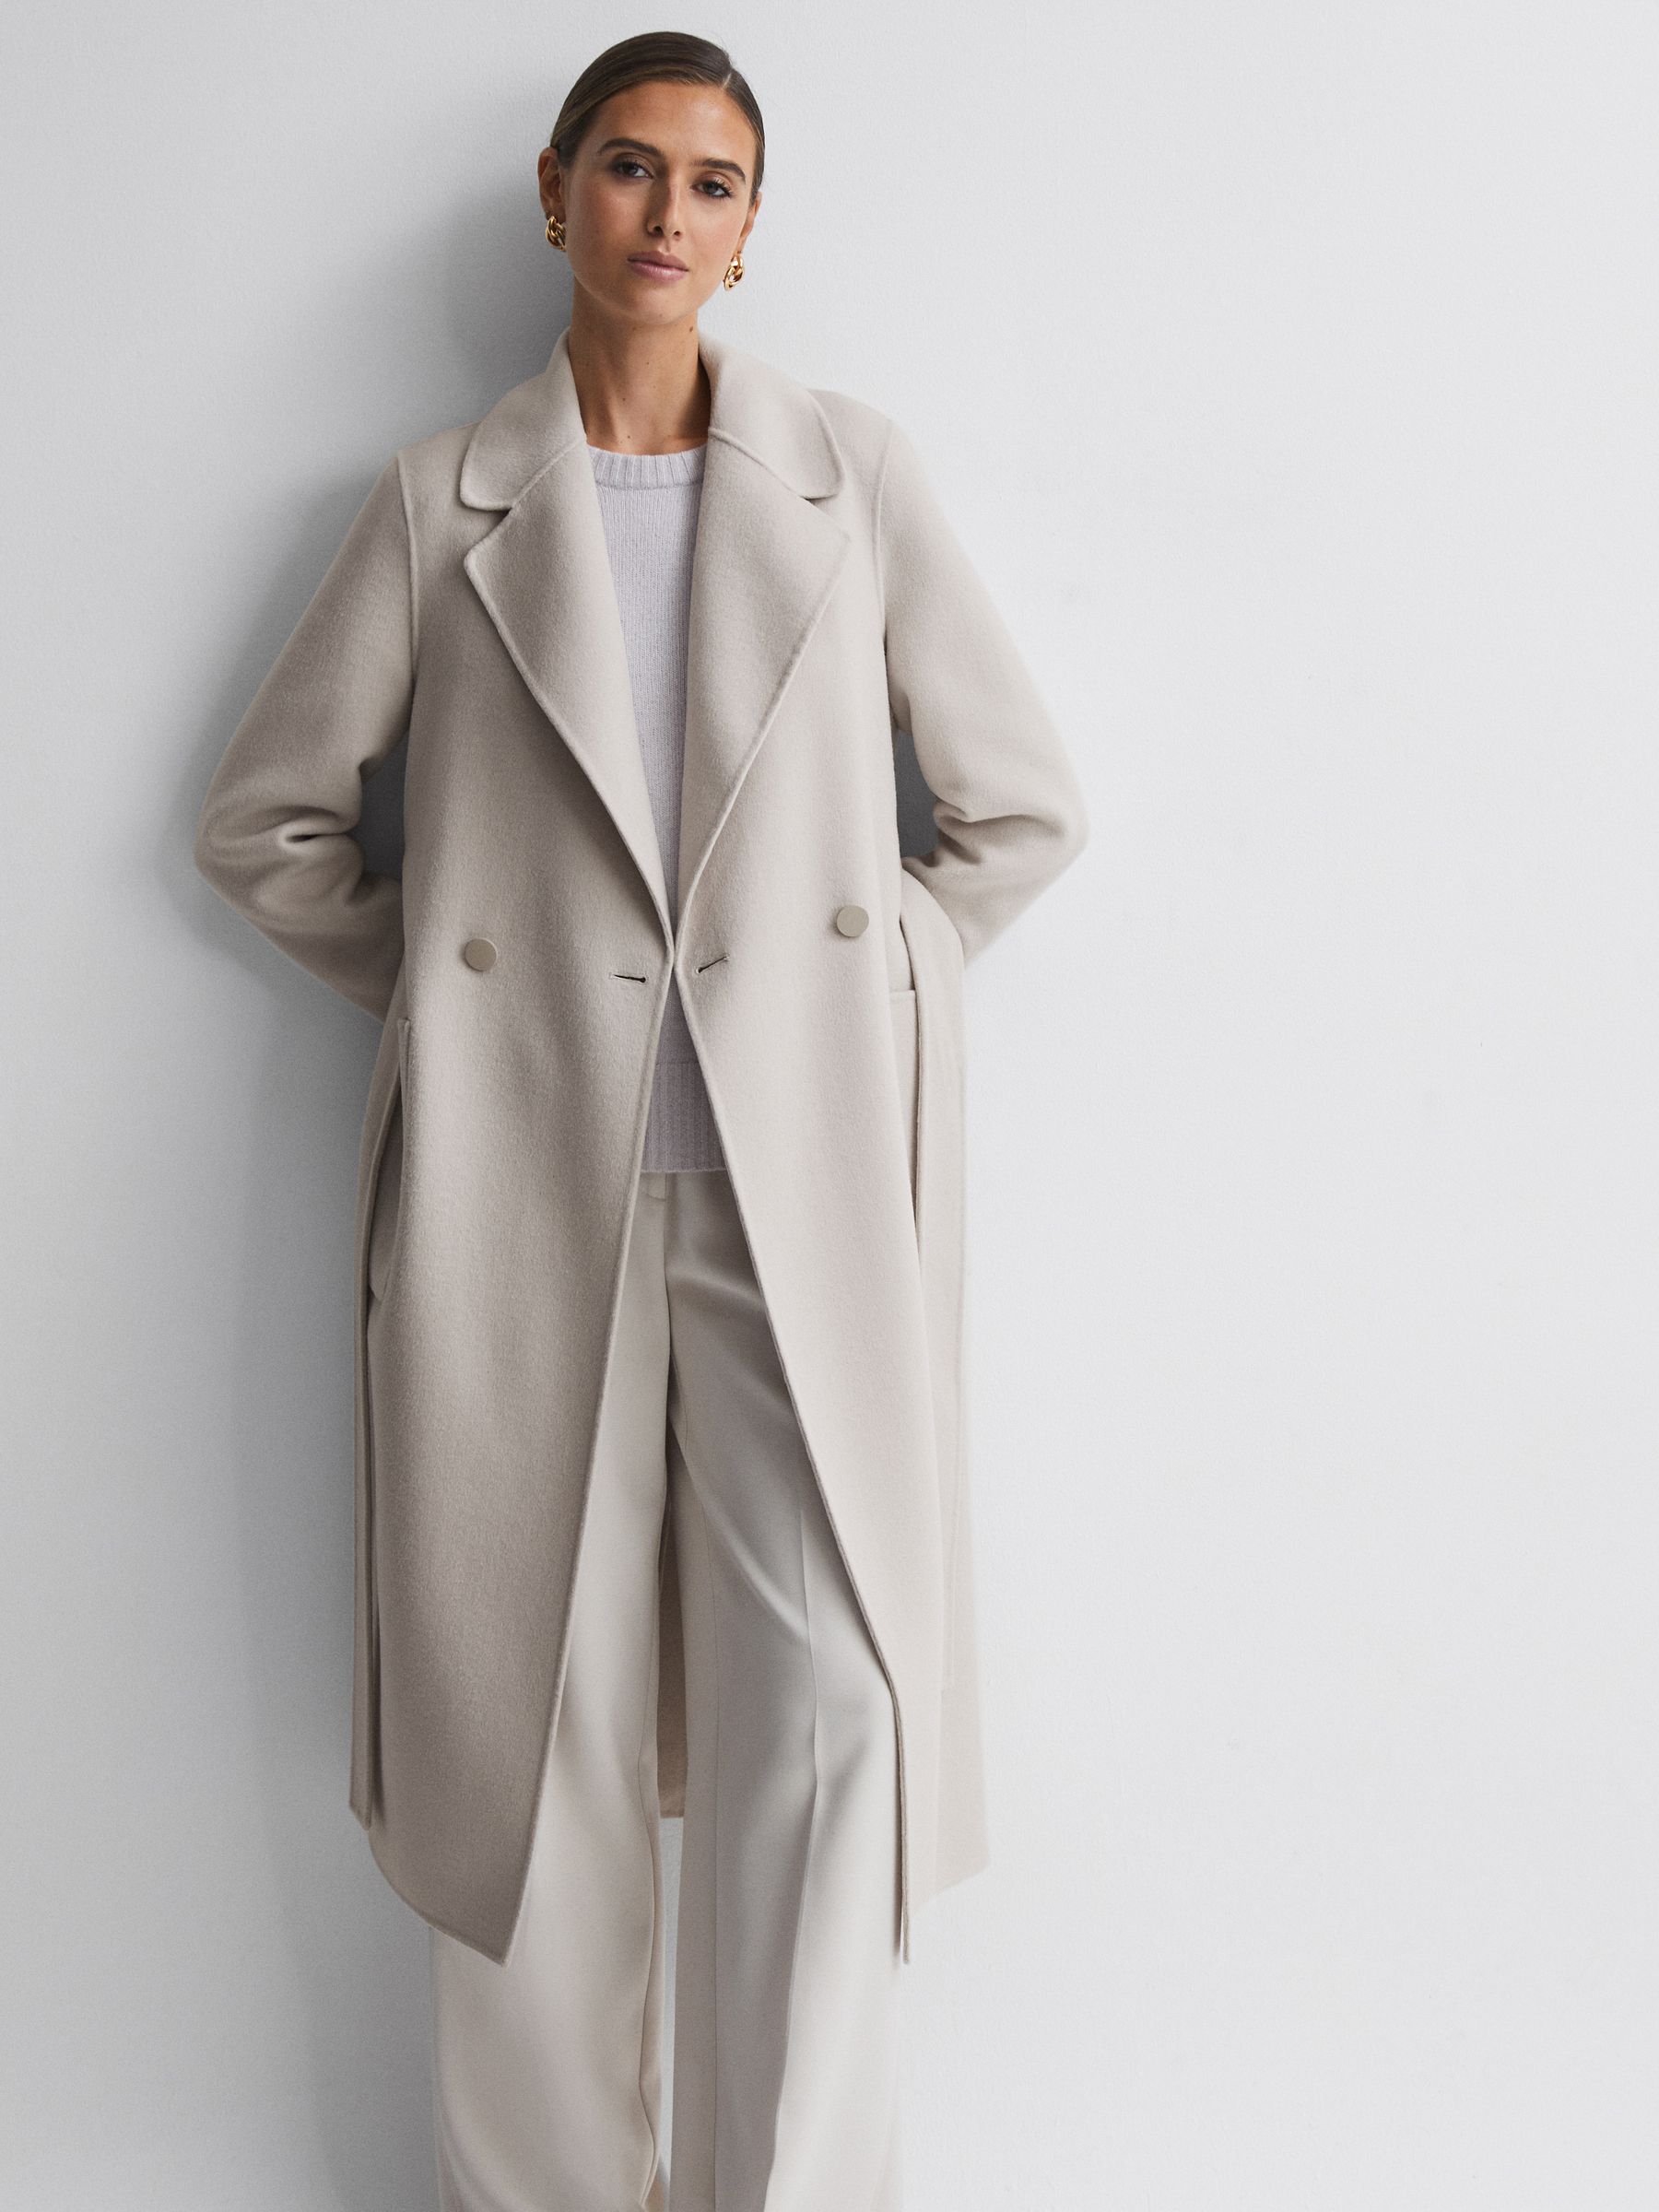 Reiss Lucia Relaxed Double Breasted Wool Blindseam Coat | REISS USA